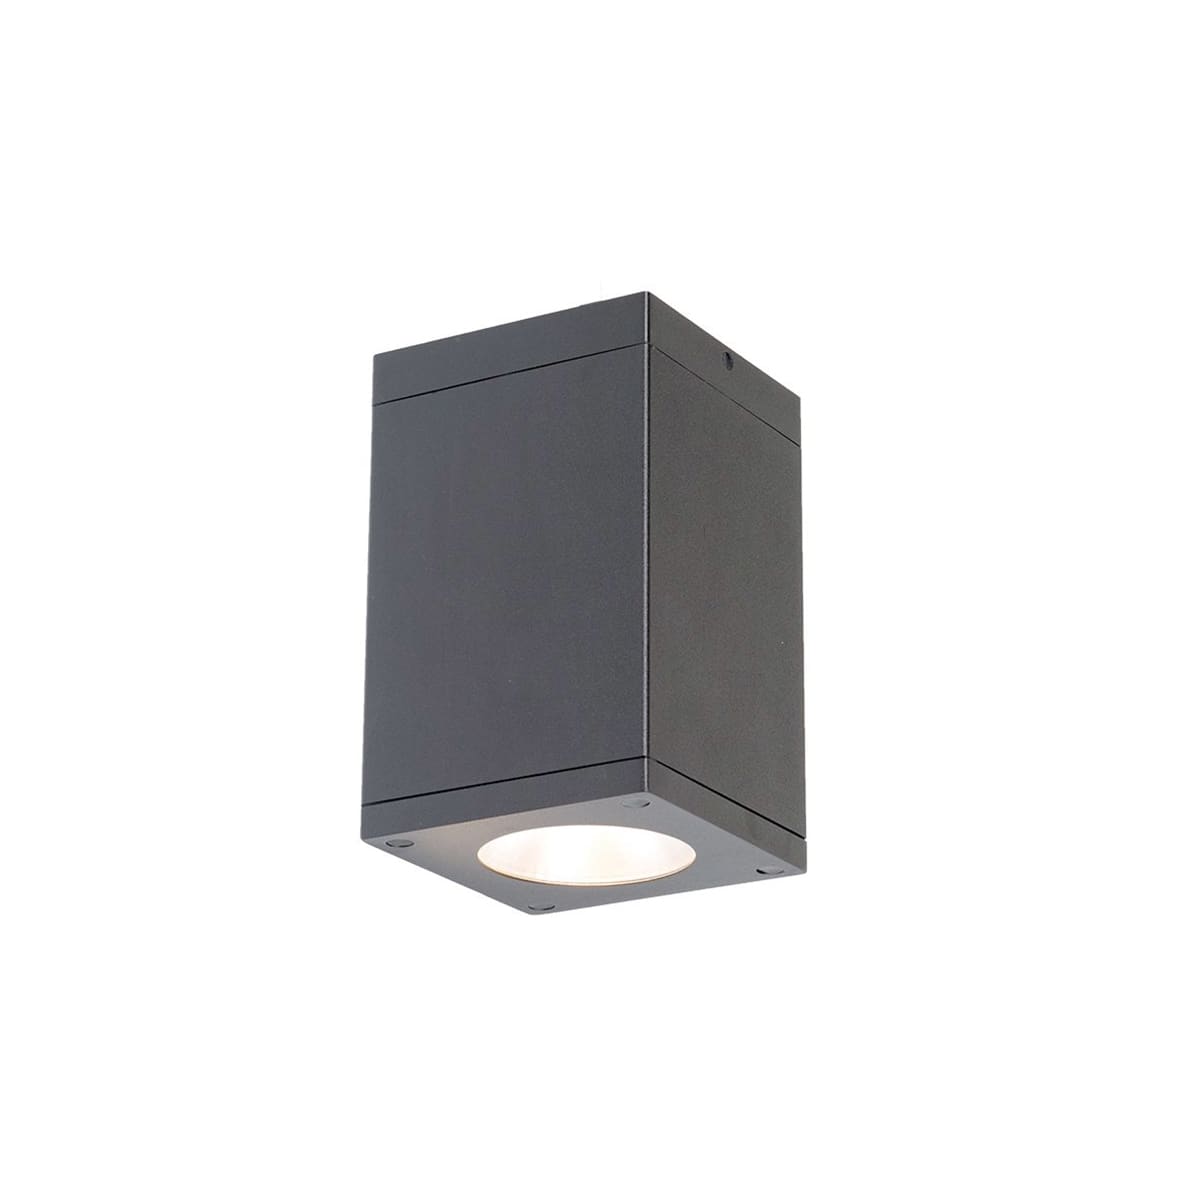 WAC Lighting DC-CD05-N927-GH Cube Architectural 5 LED Flush Mount Outdoor Ceiling Lighting 25 Degrees Narrow Beam Graphite